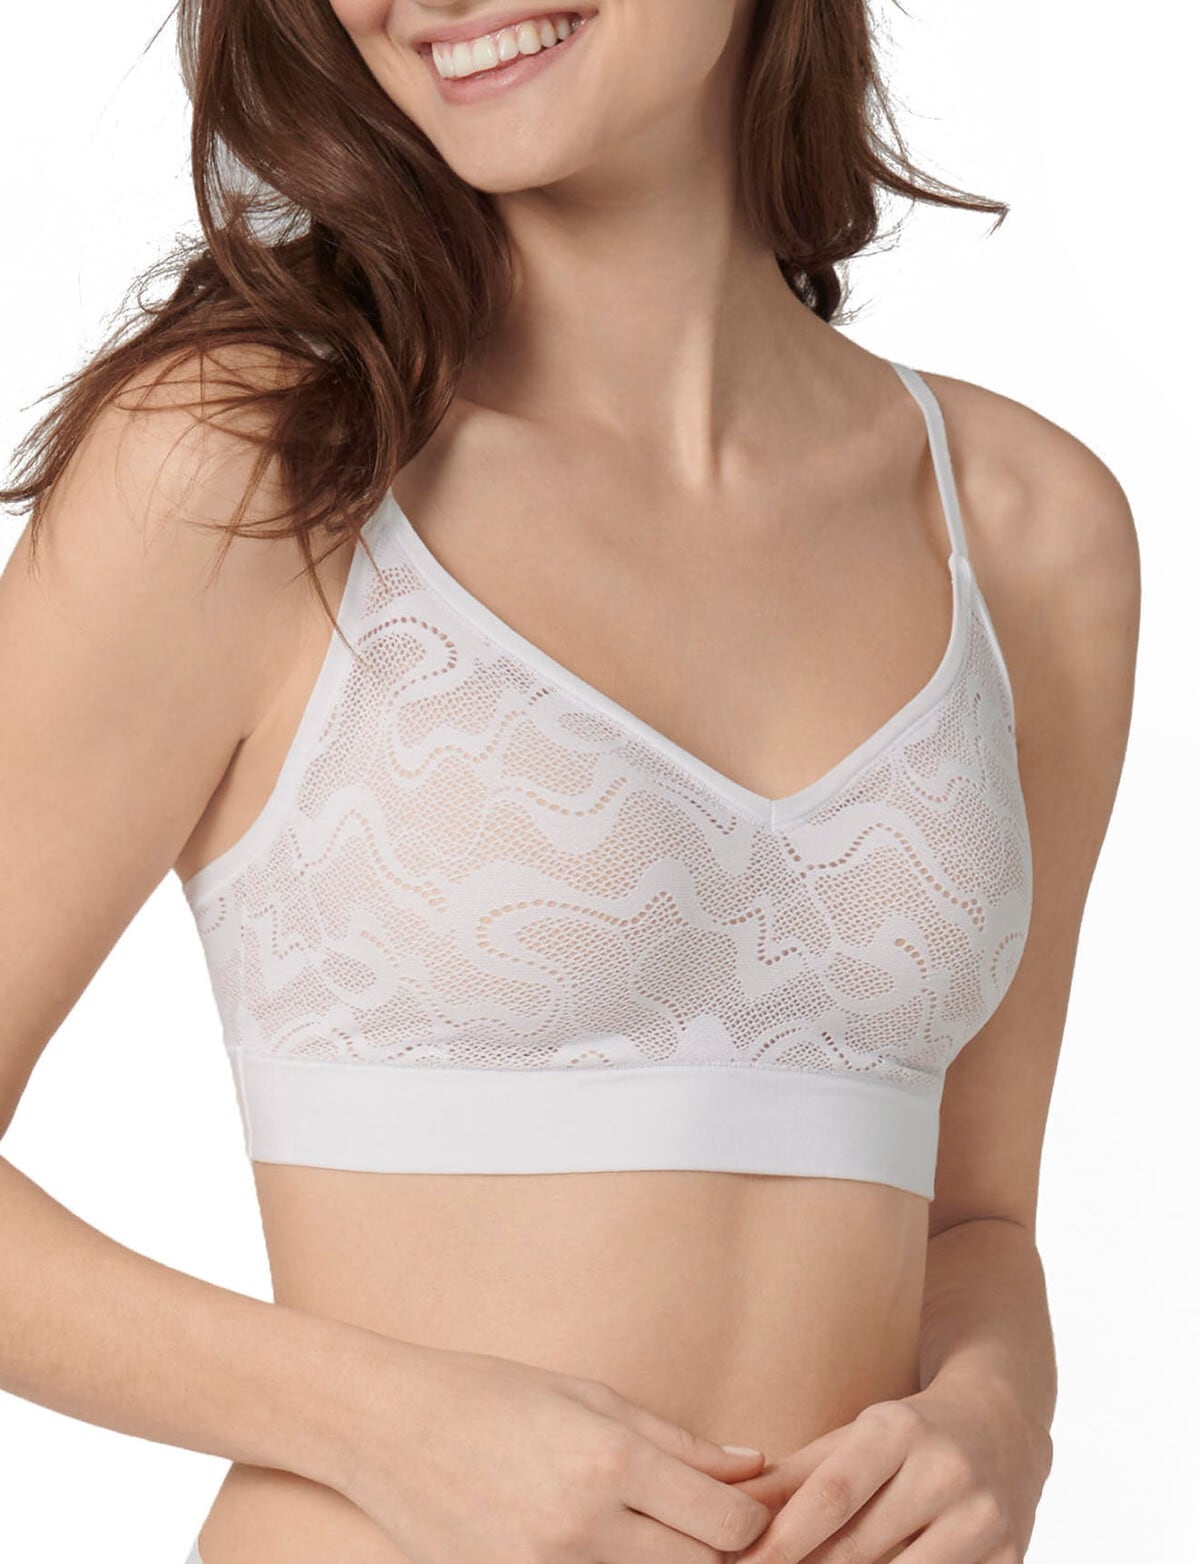 Sloggi Go Allround Lace Wirefree Bralette, White, One Size - Lingerie Red  Dot